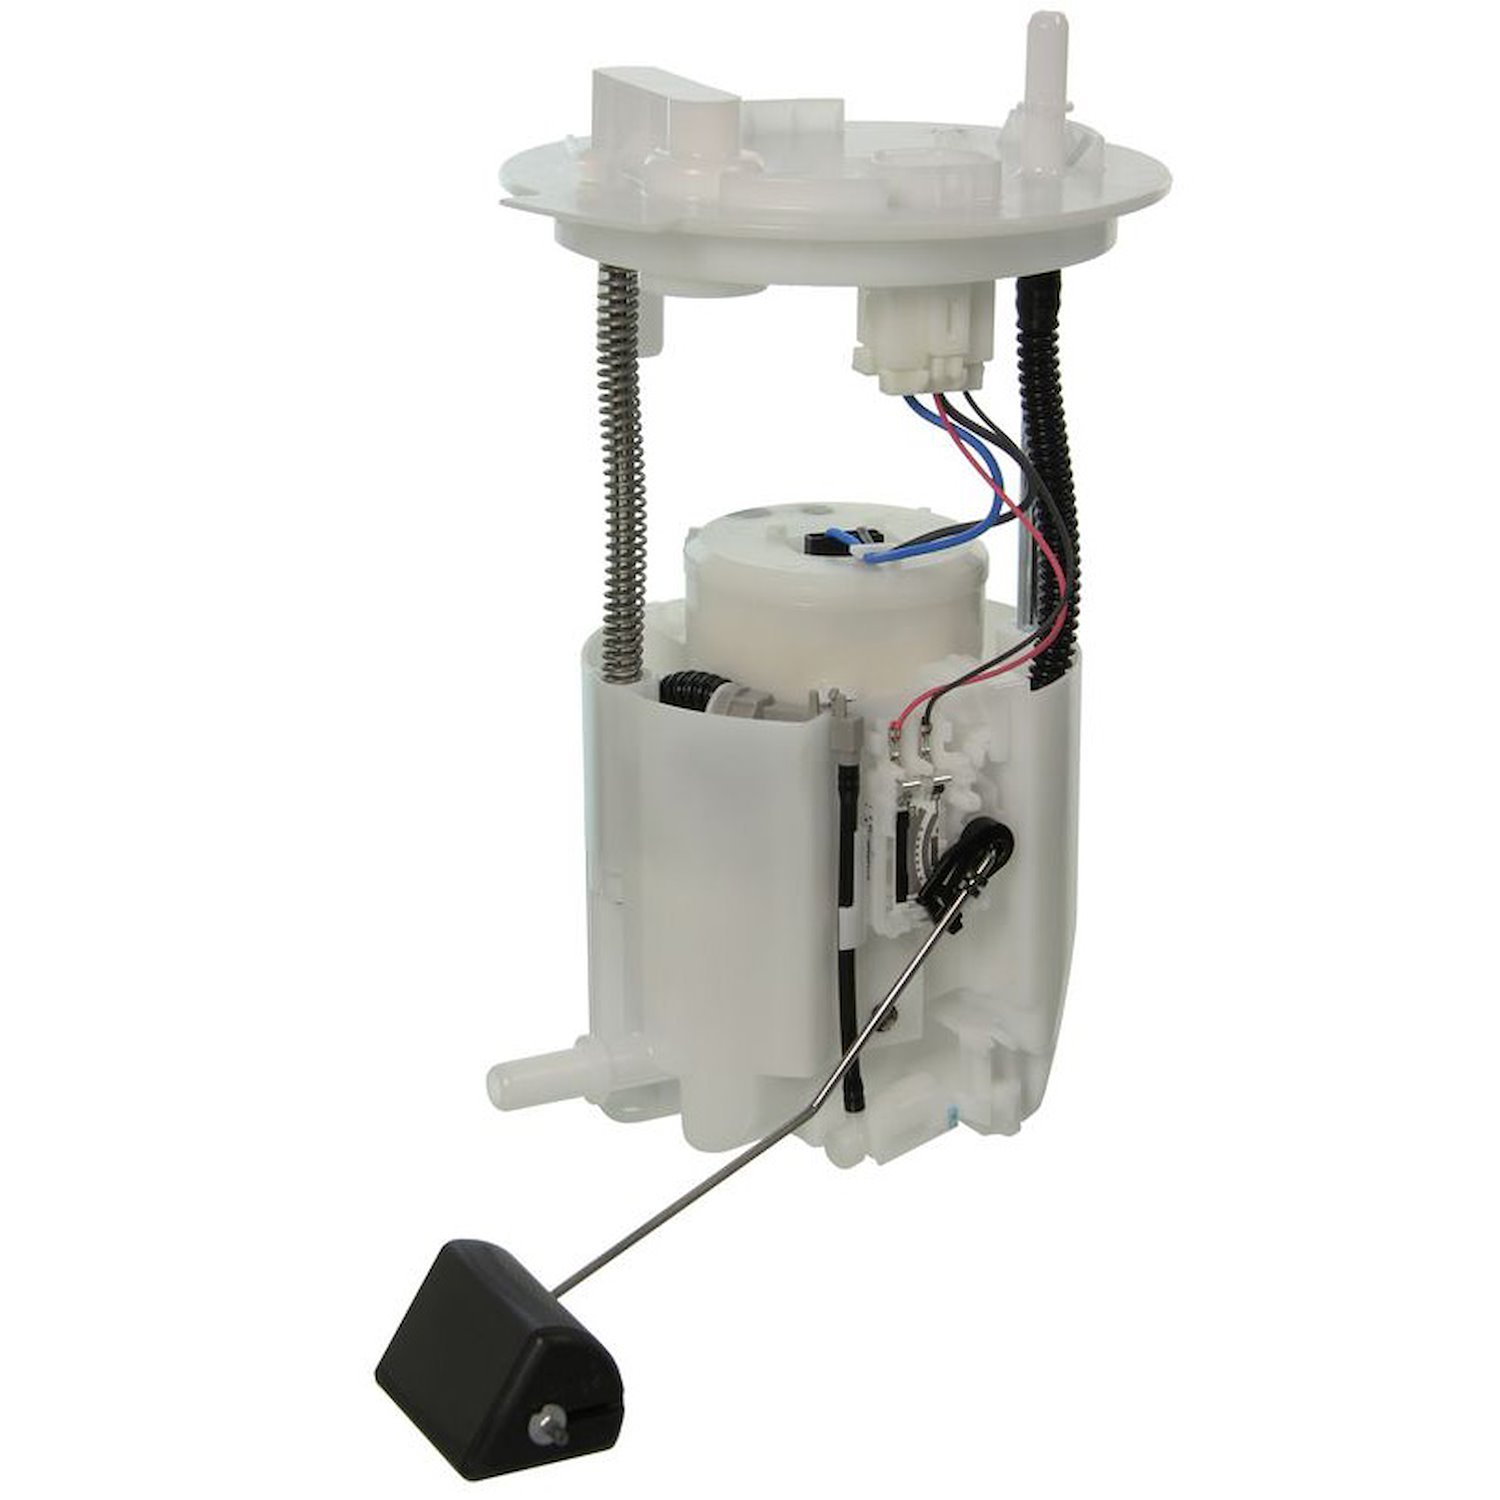 OE Ford Replacement Fuel Pump Module Assembly for 2010-2016 Ford E-350/E-450 Super Duty